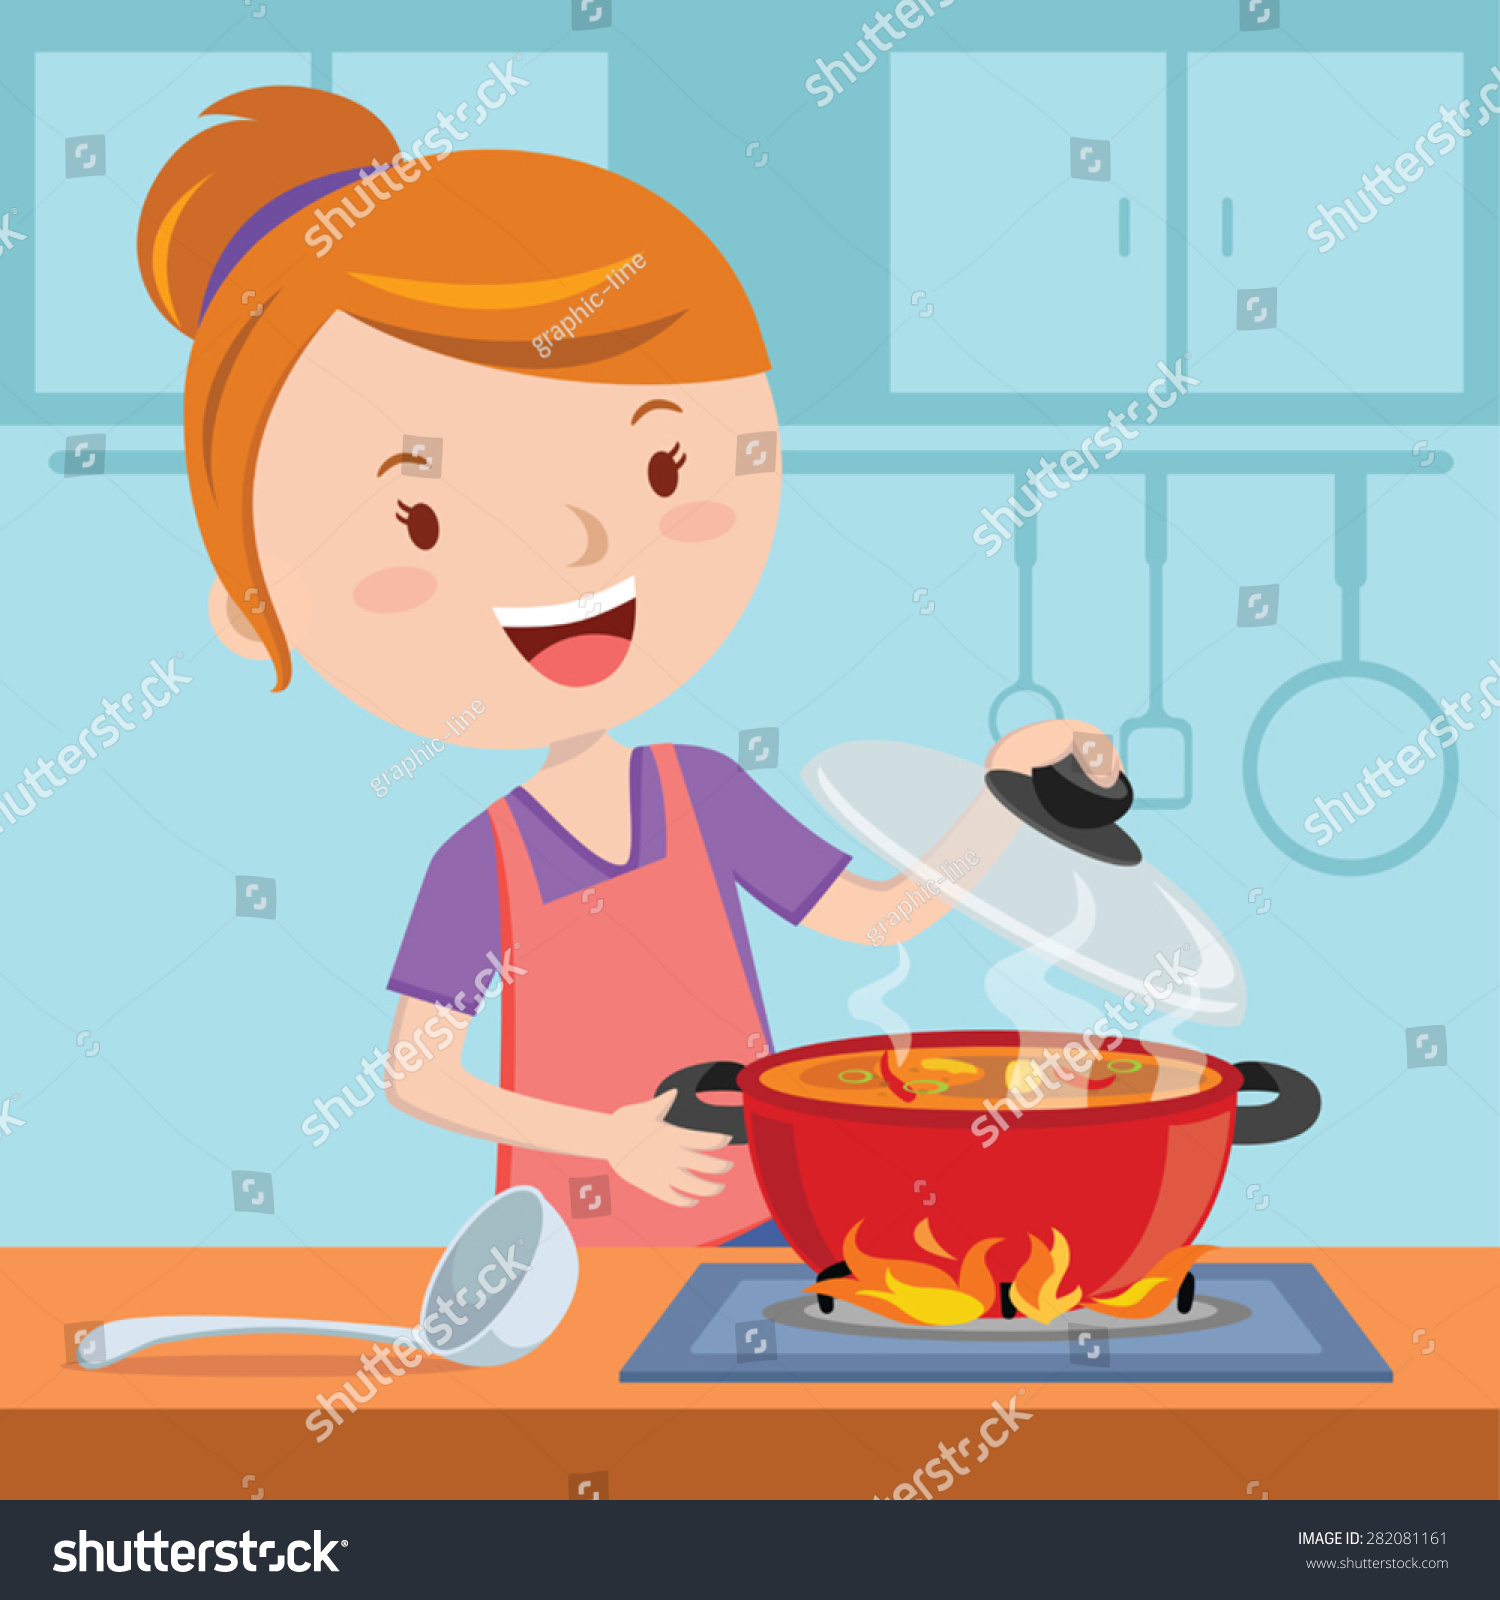 mom cooking clipart free - photo #44